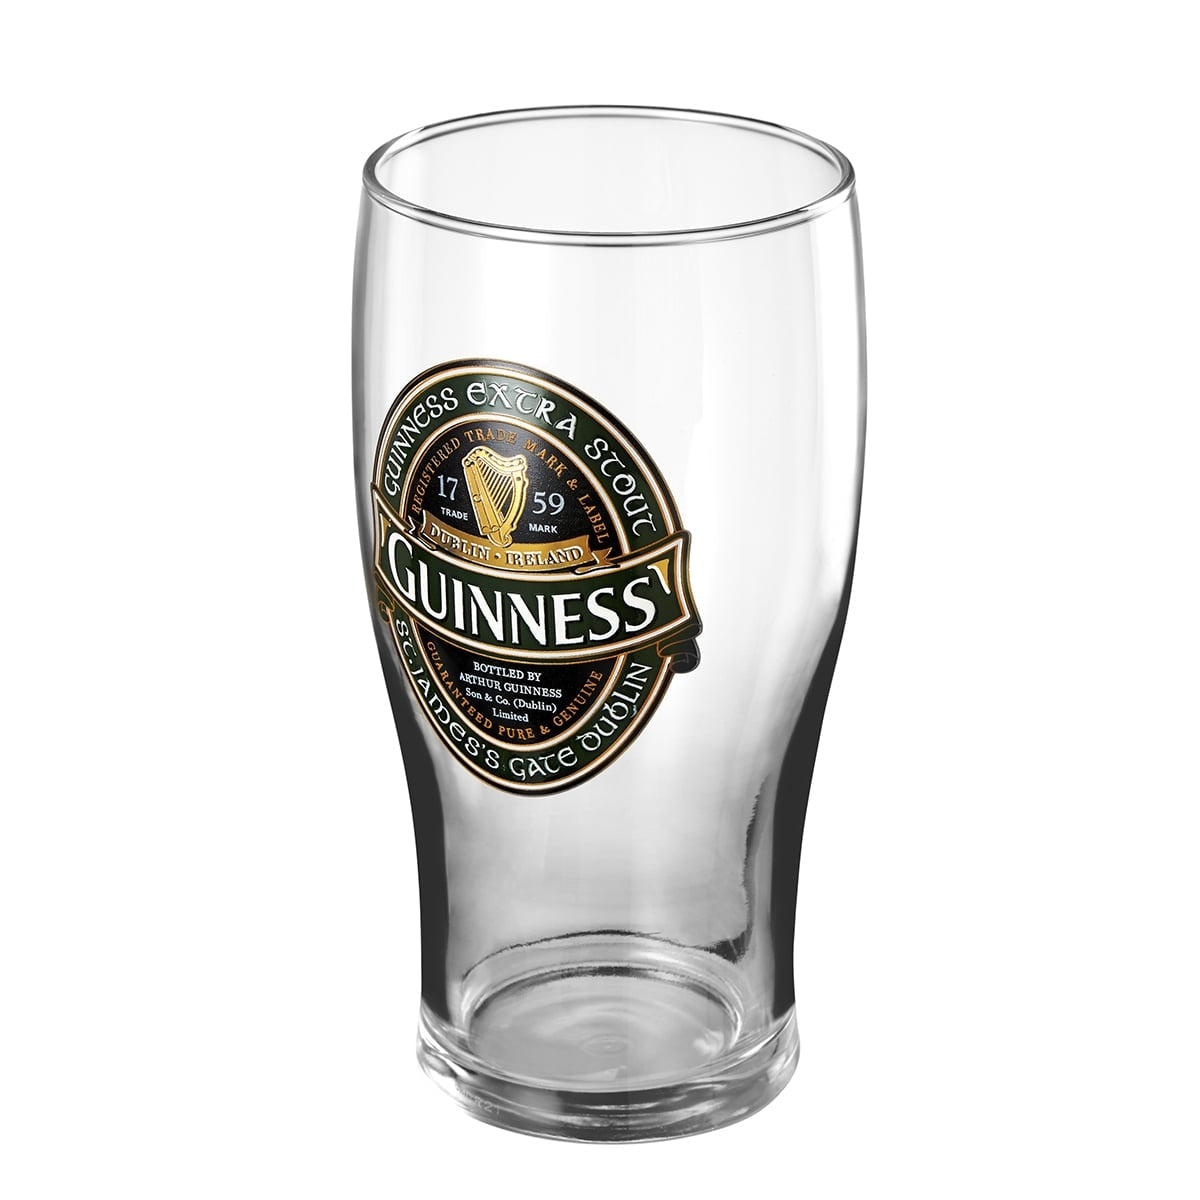 Guinness Ireland Collection Pint Glass - 4 Pack